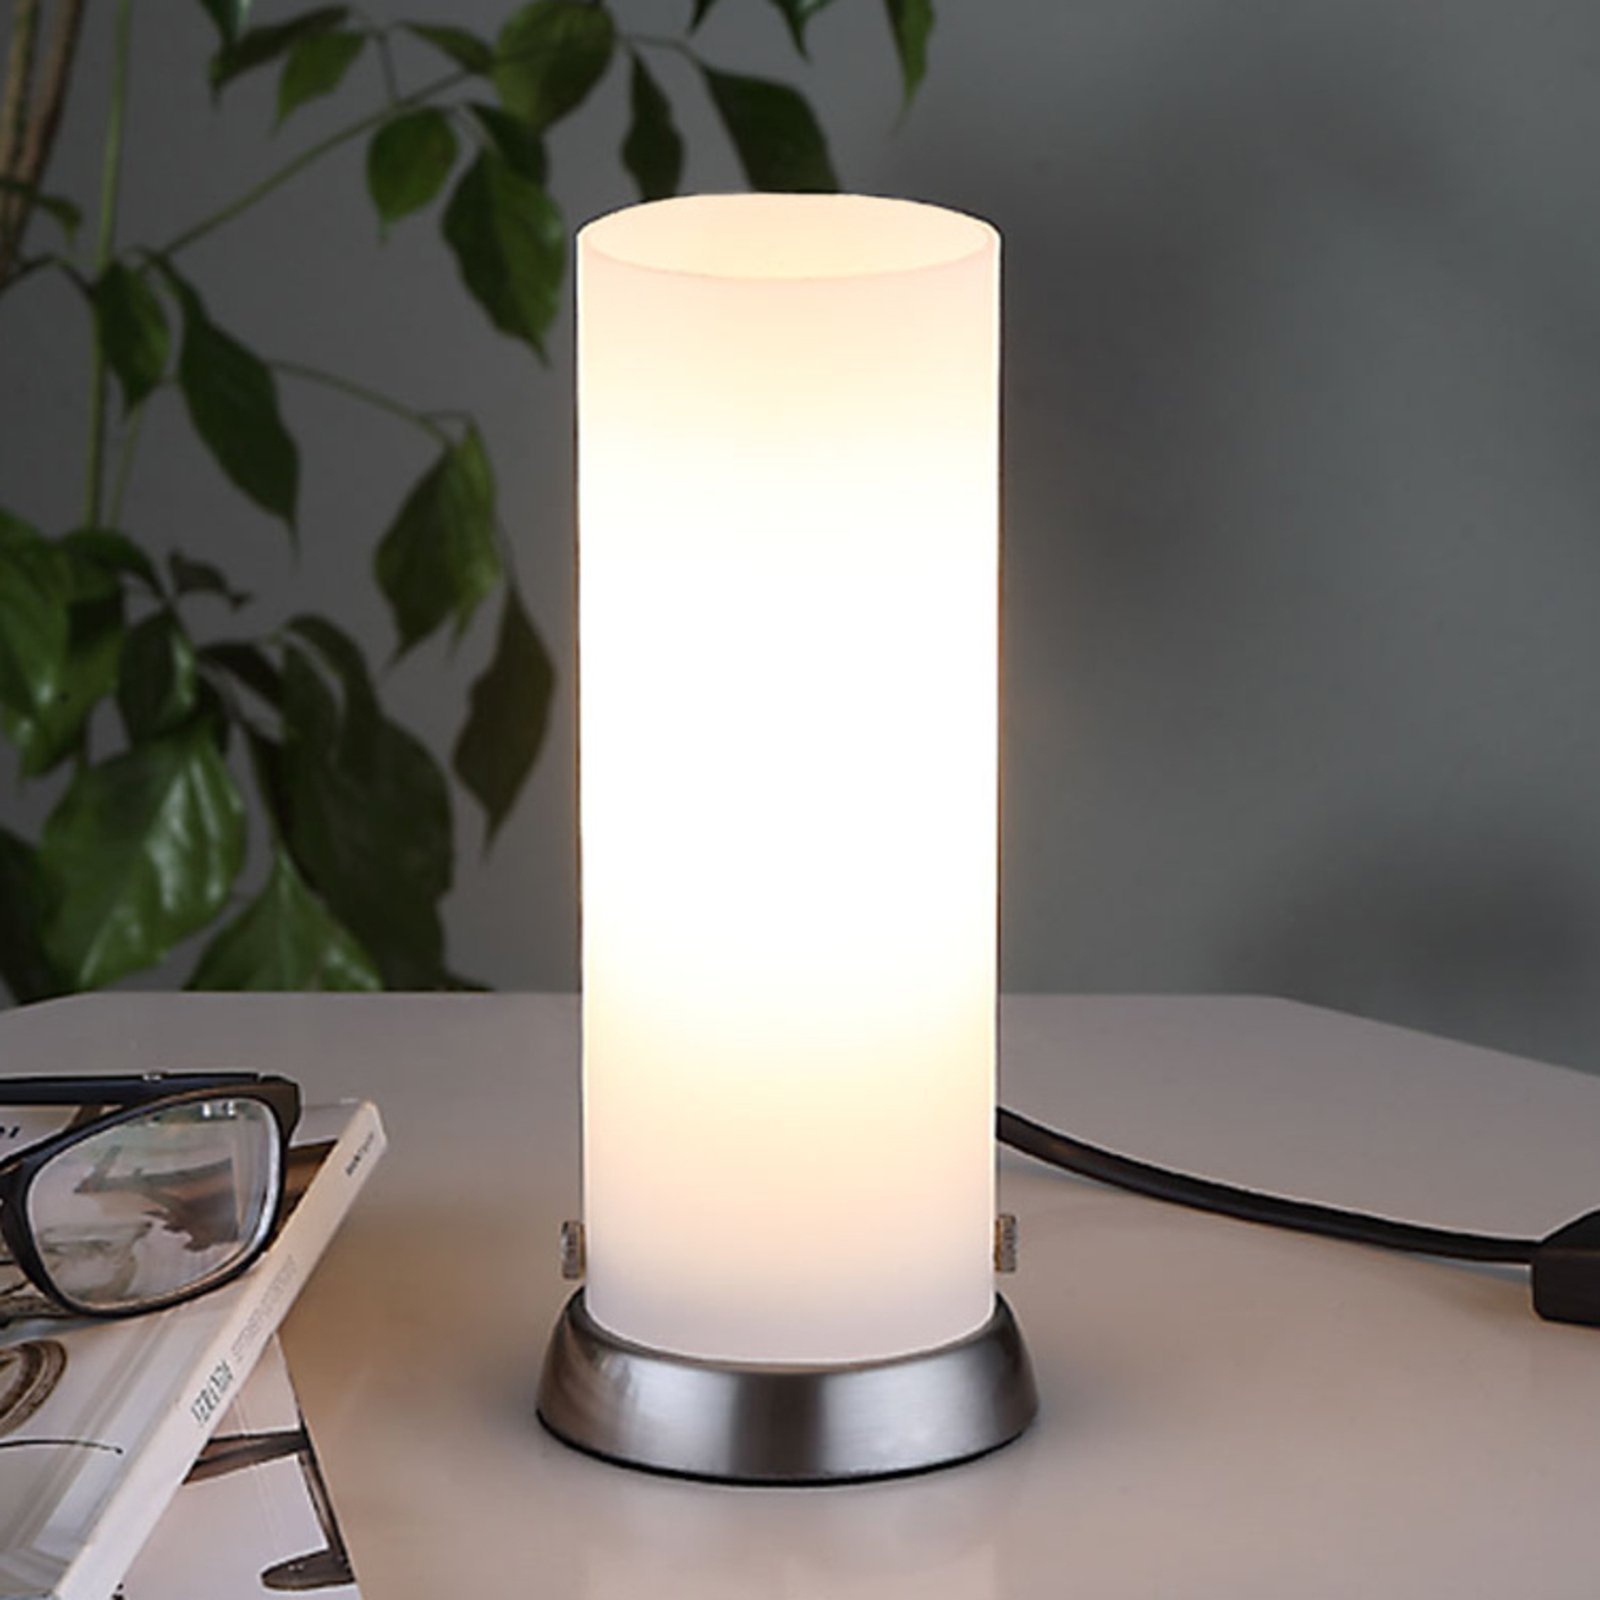 Cylindrical Andrew LED table lamp, made of glass